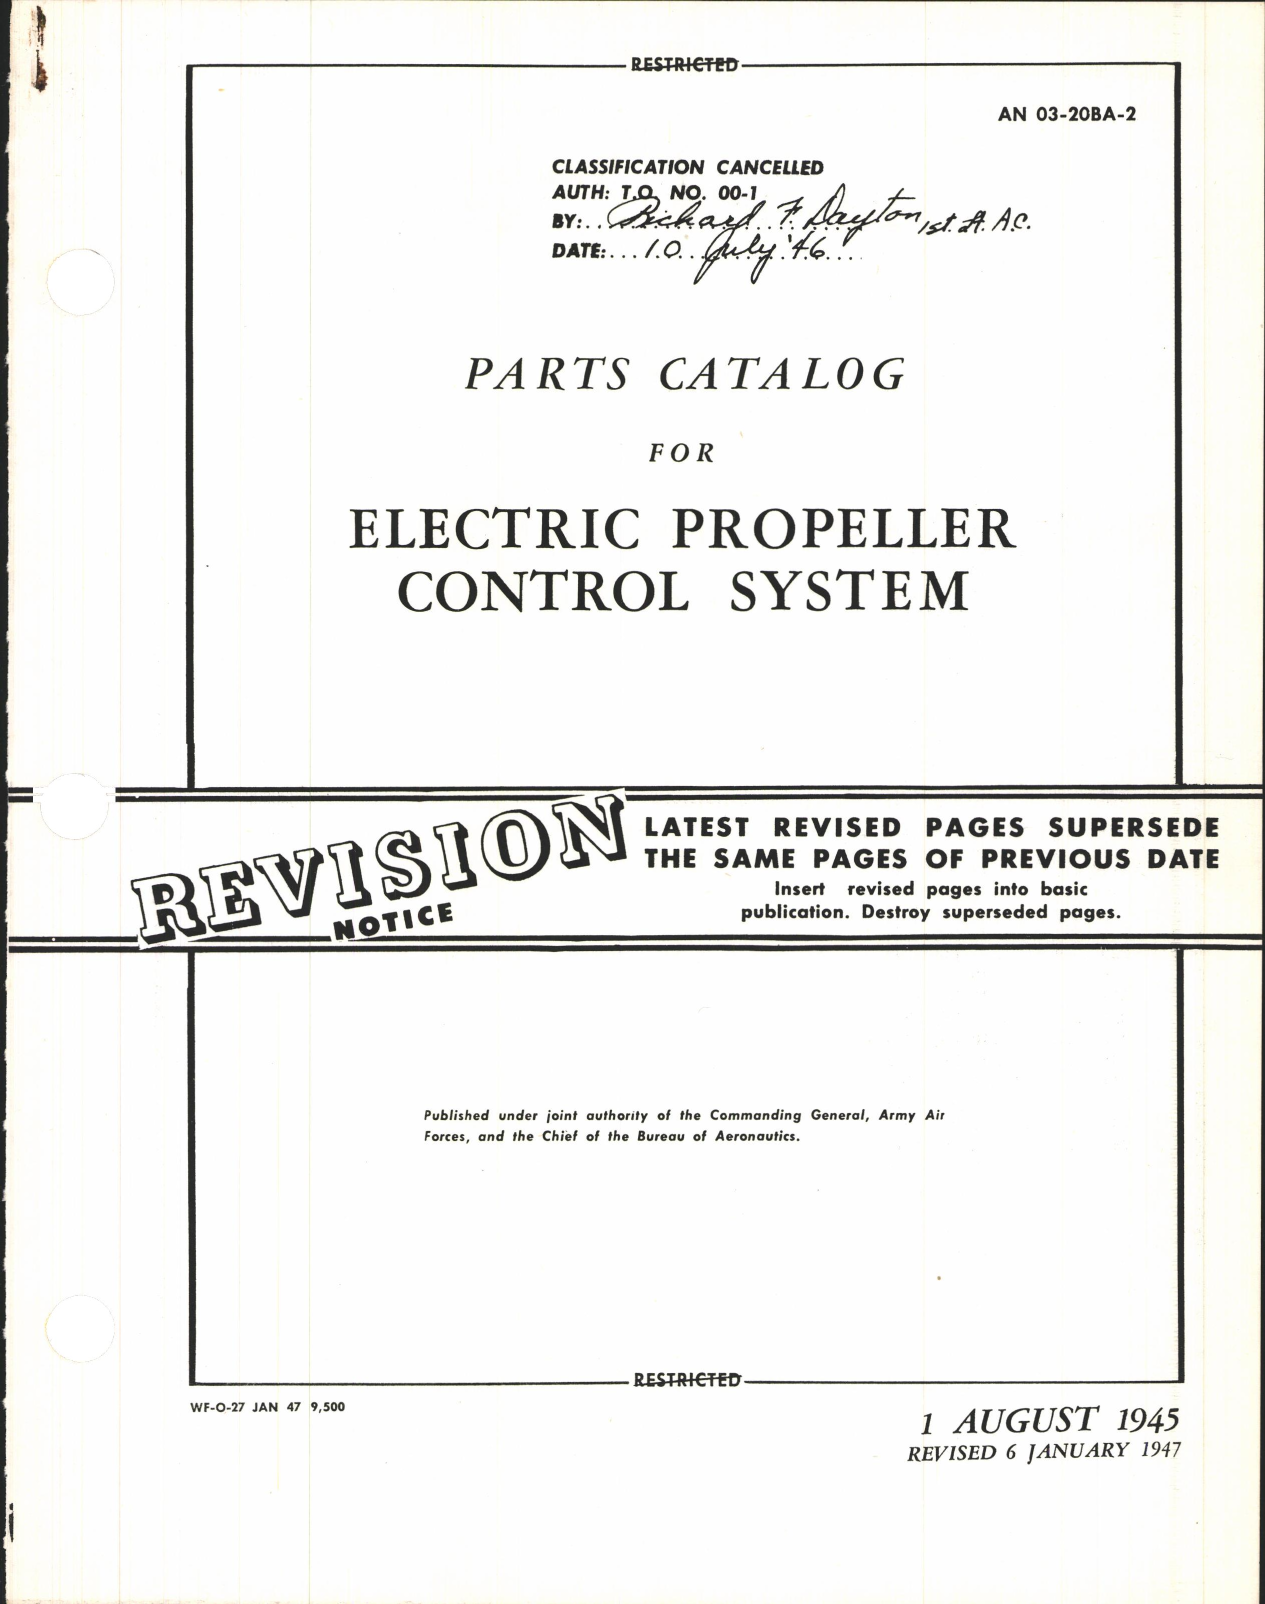 Sample page 1 from AirCorps Library document: Parts Catalog for Electric Propeller Control System